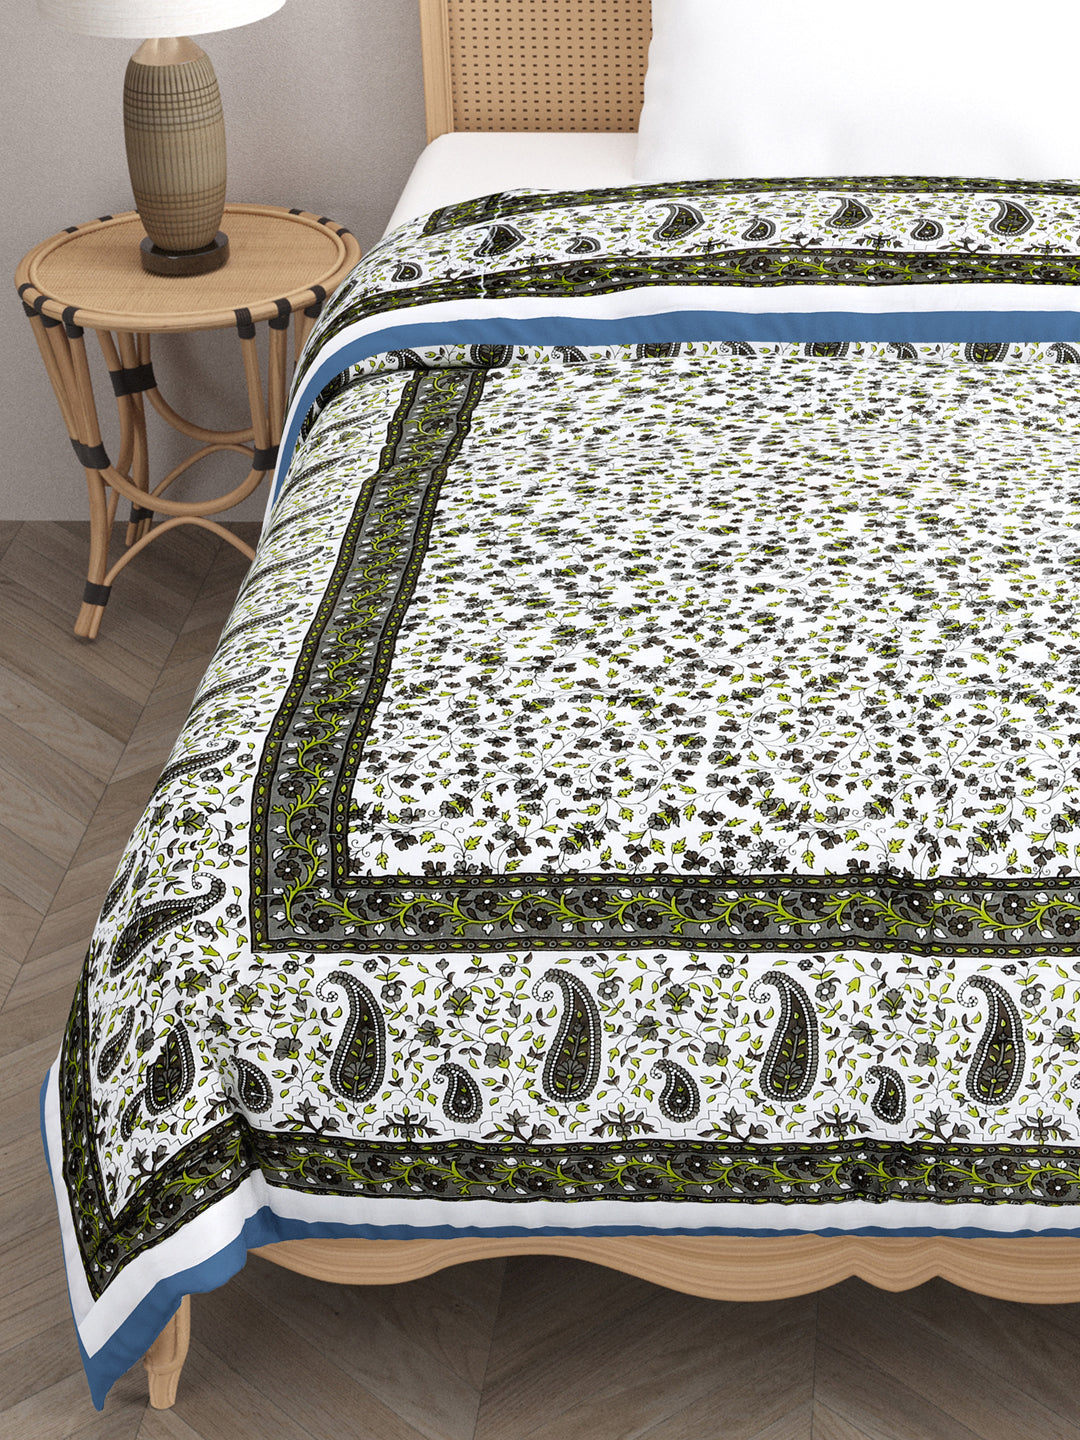 Floral Printed Single Bed Cotton Quilt with cotton filling